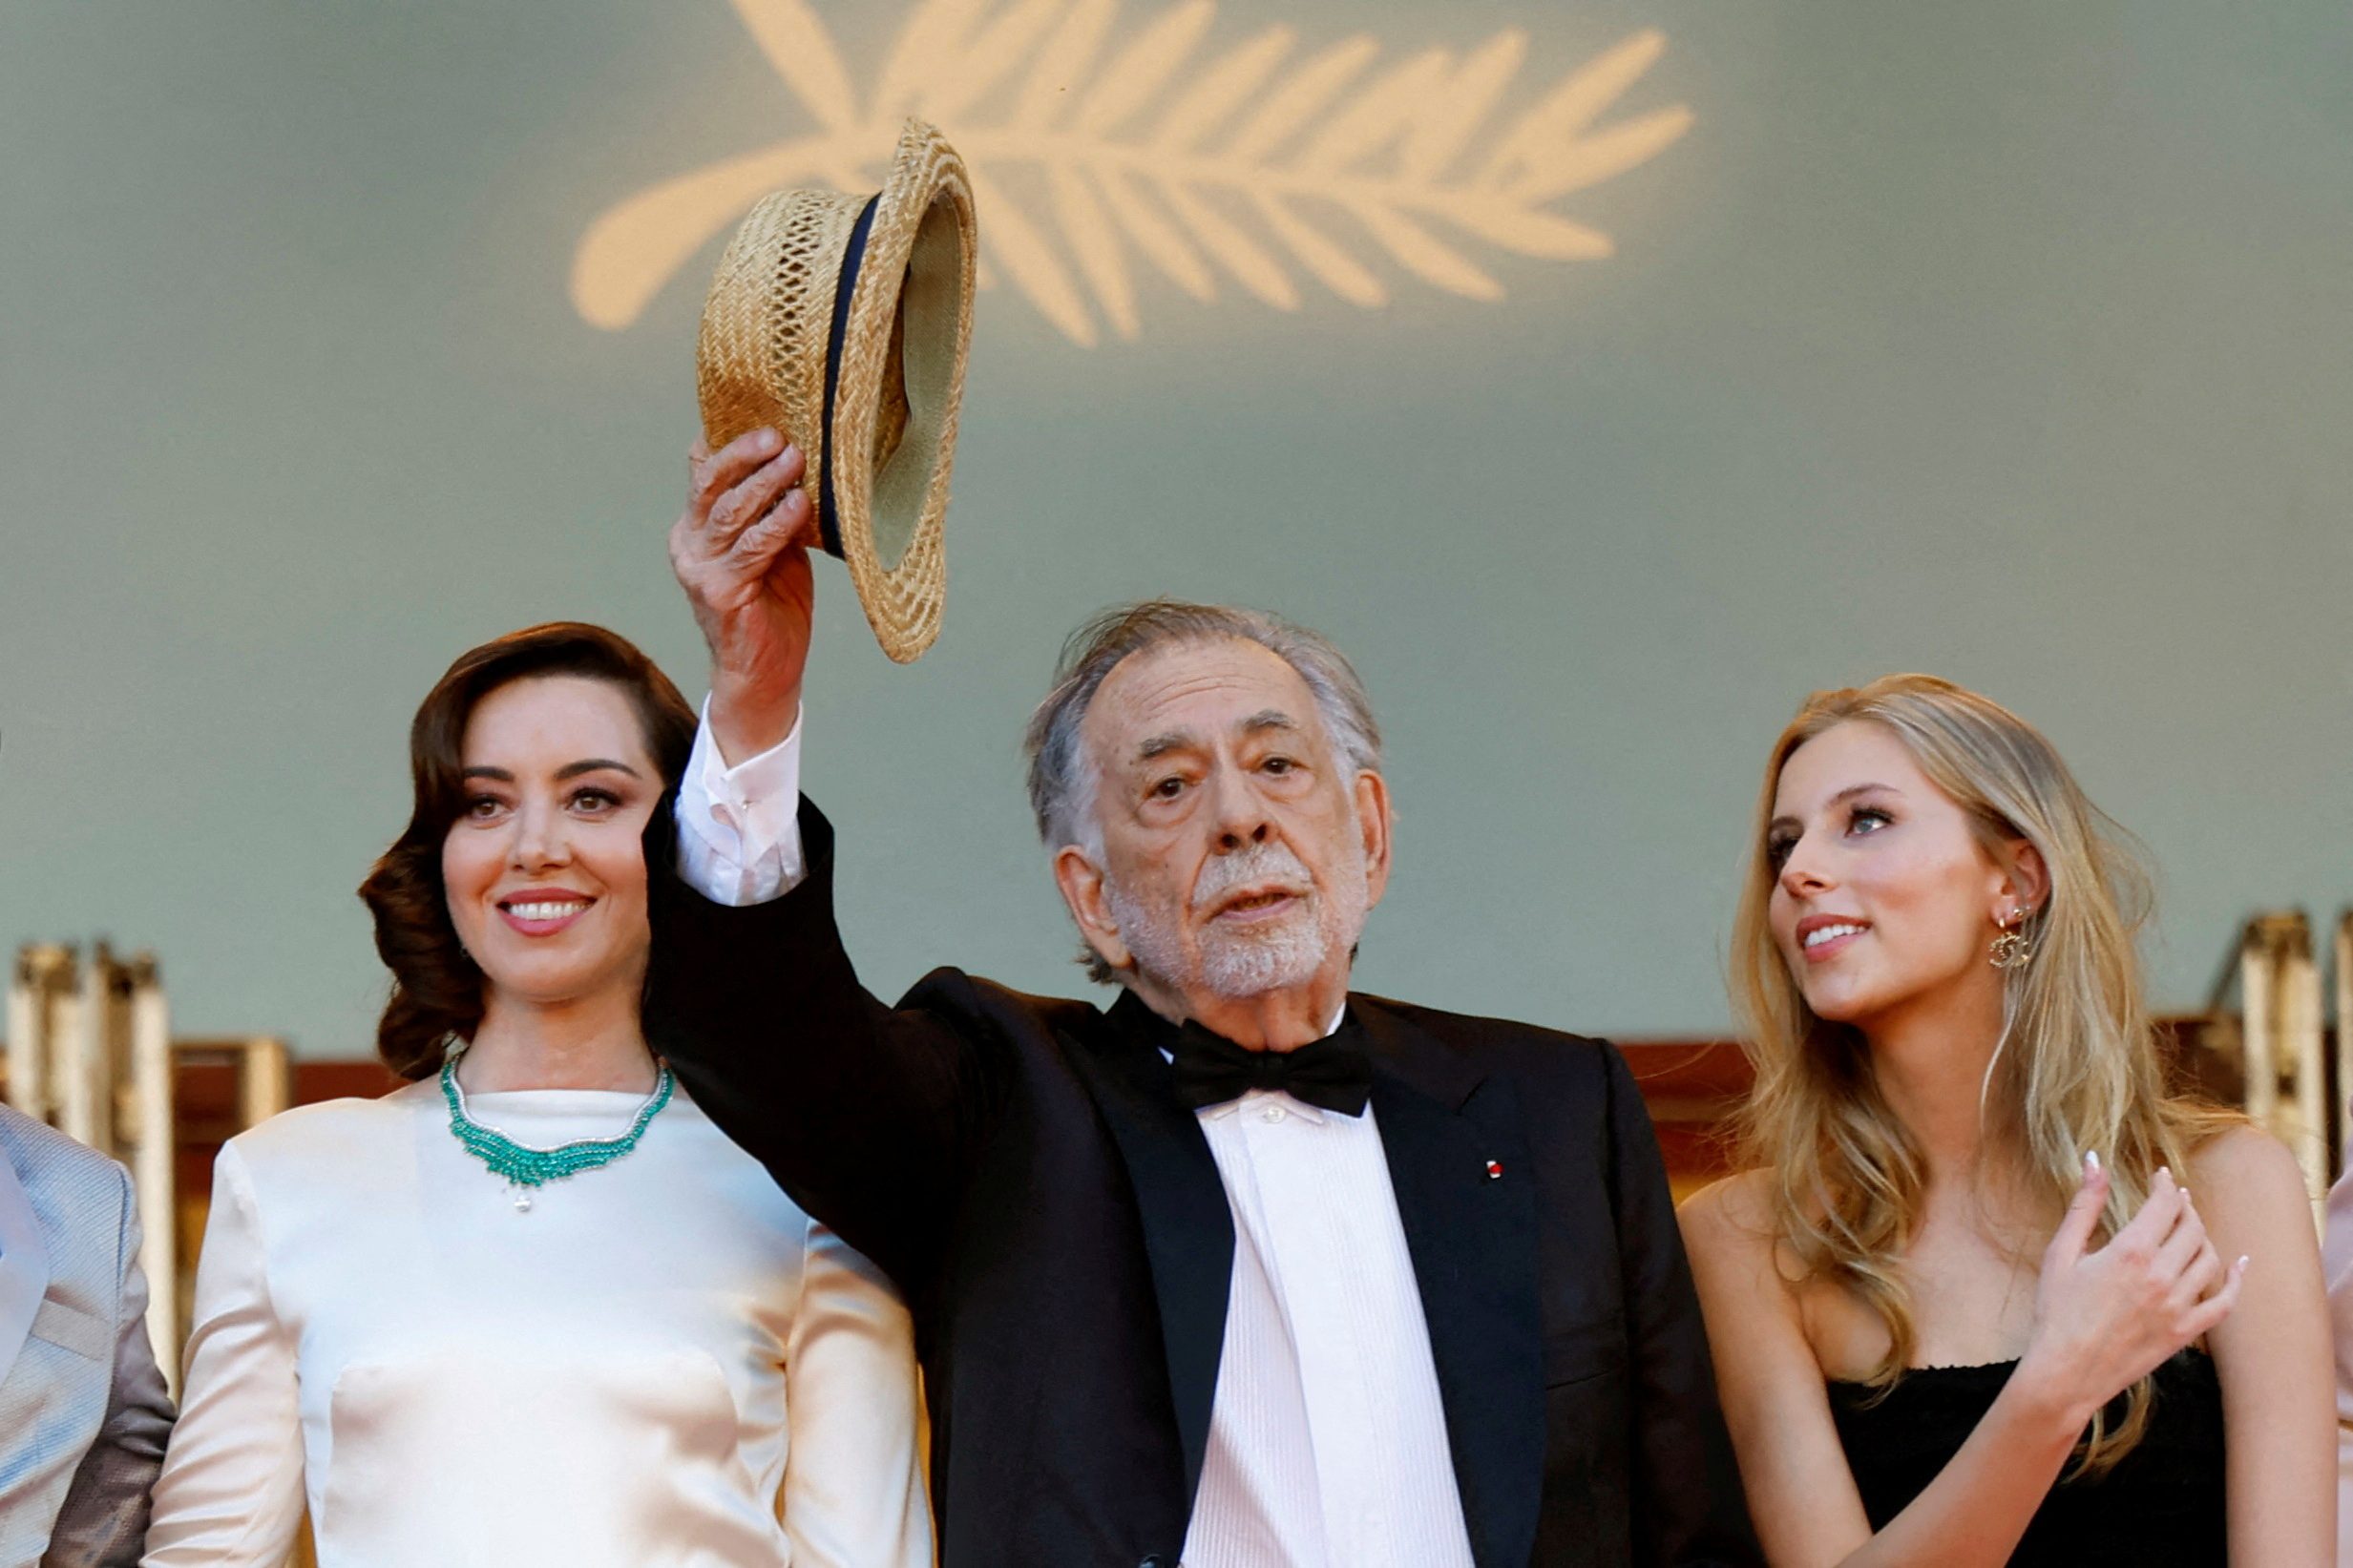 After decades, Francis Ford Coppola’s opus ‘Megalopolis’ finally debuts at Cannes